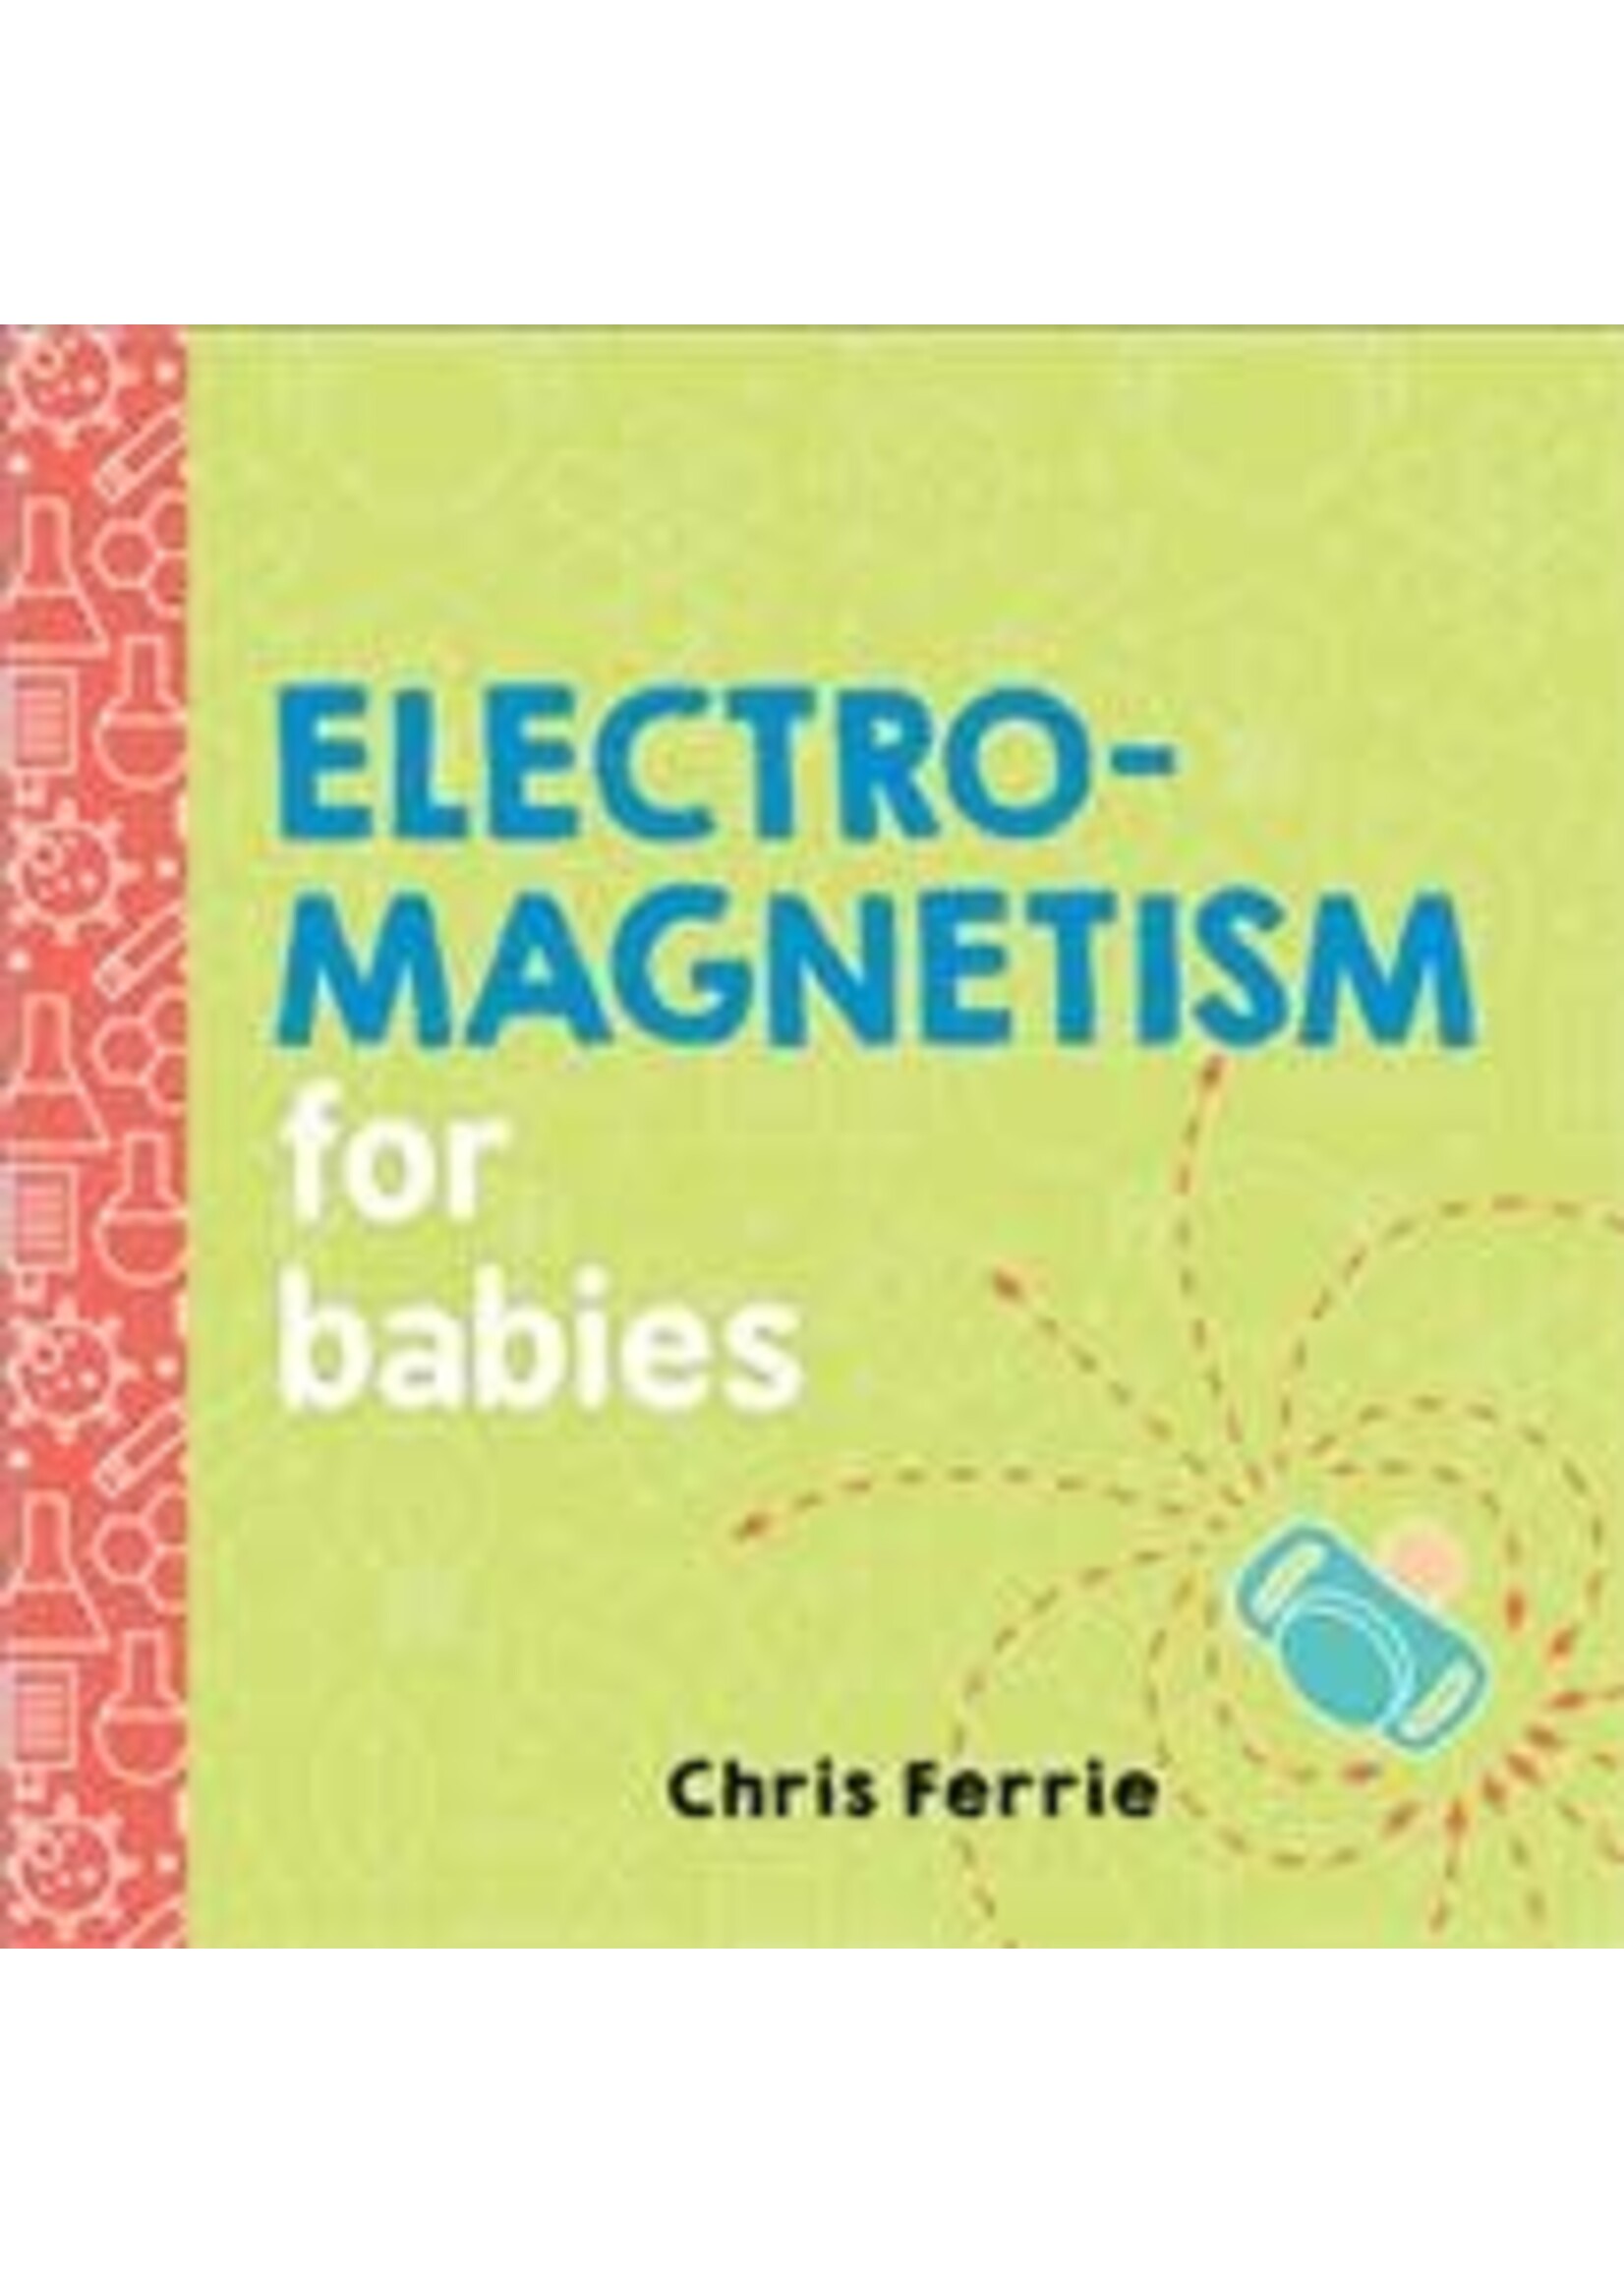 Electromagnetism for Babies by Chris Ferrie